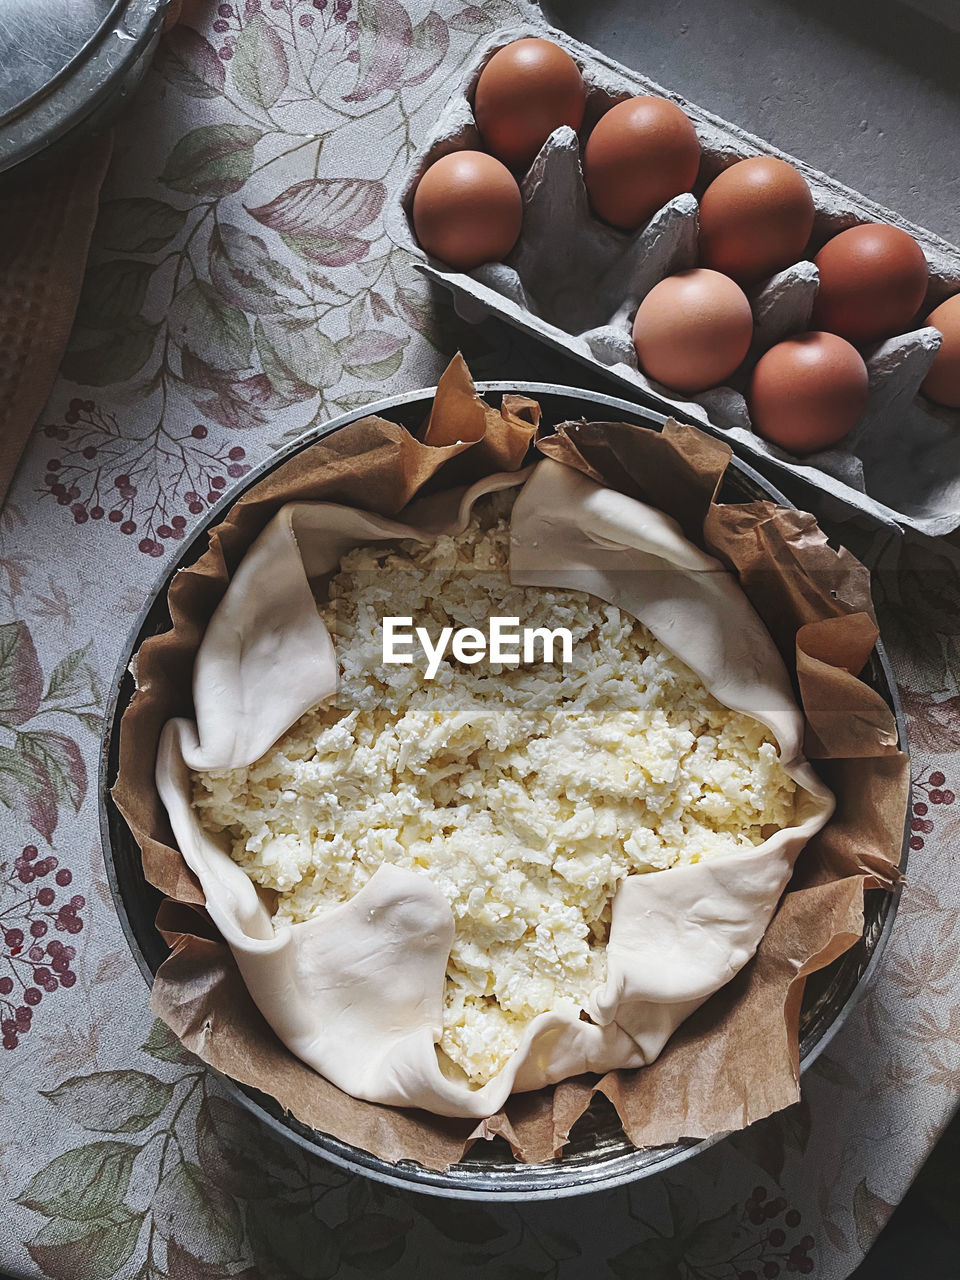 Preparing pie and eggs on table